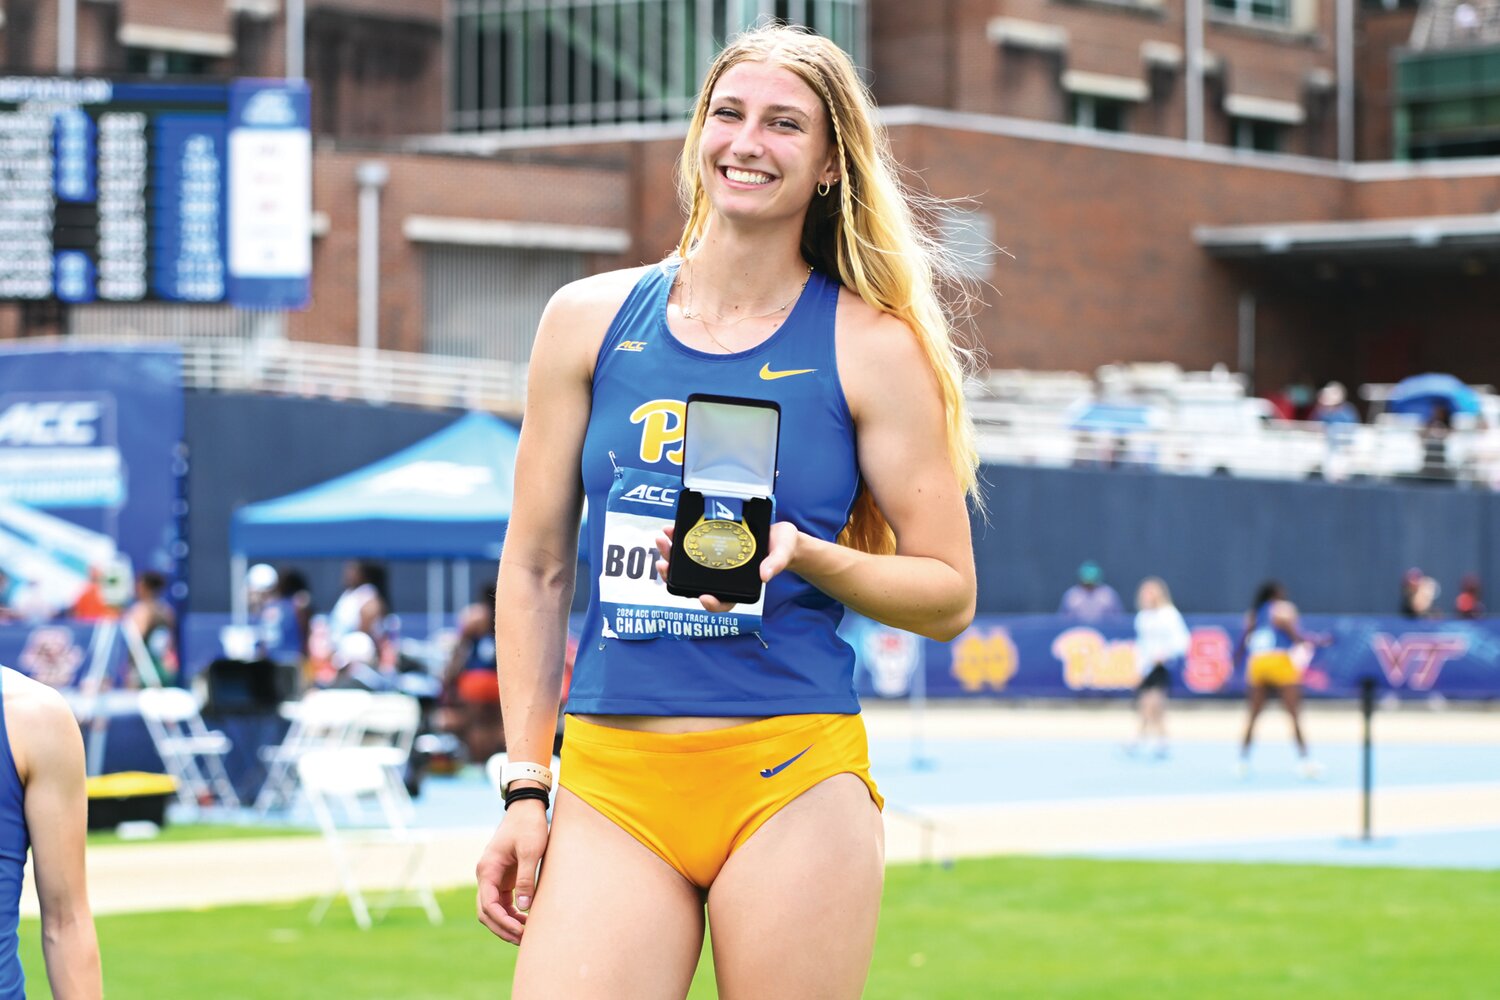 Pitt’s Lydia Bottelier, a former track and field standout at Palisades, earned bronze in the heptathlon at this year’s ACC outdoor championships.